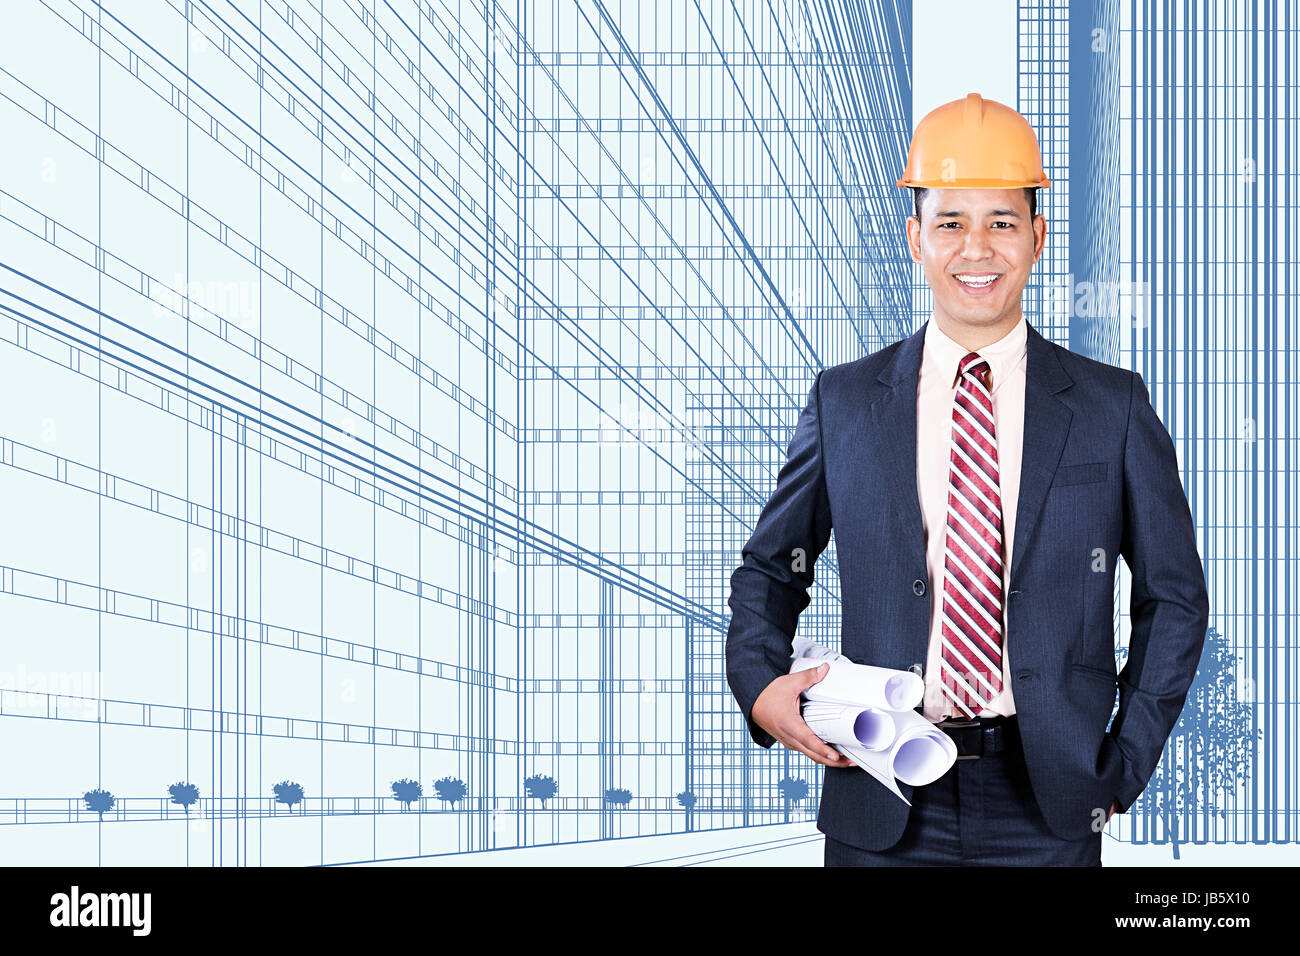 1 Indian Man Architect Holding Blueprint Buildings Engineer Real Estate Project Digital Picture Stock Photo